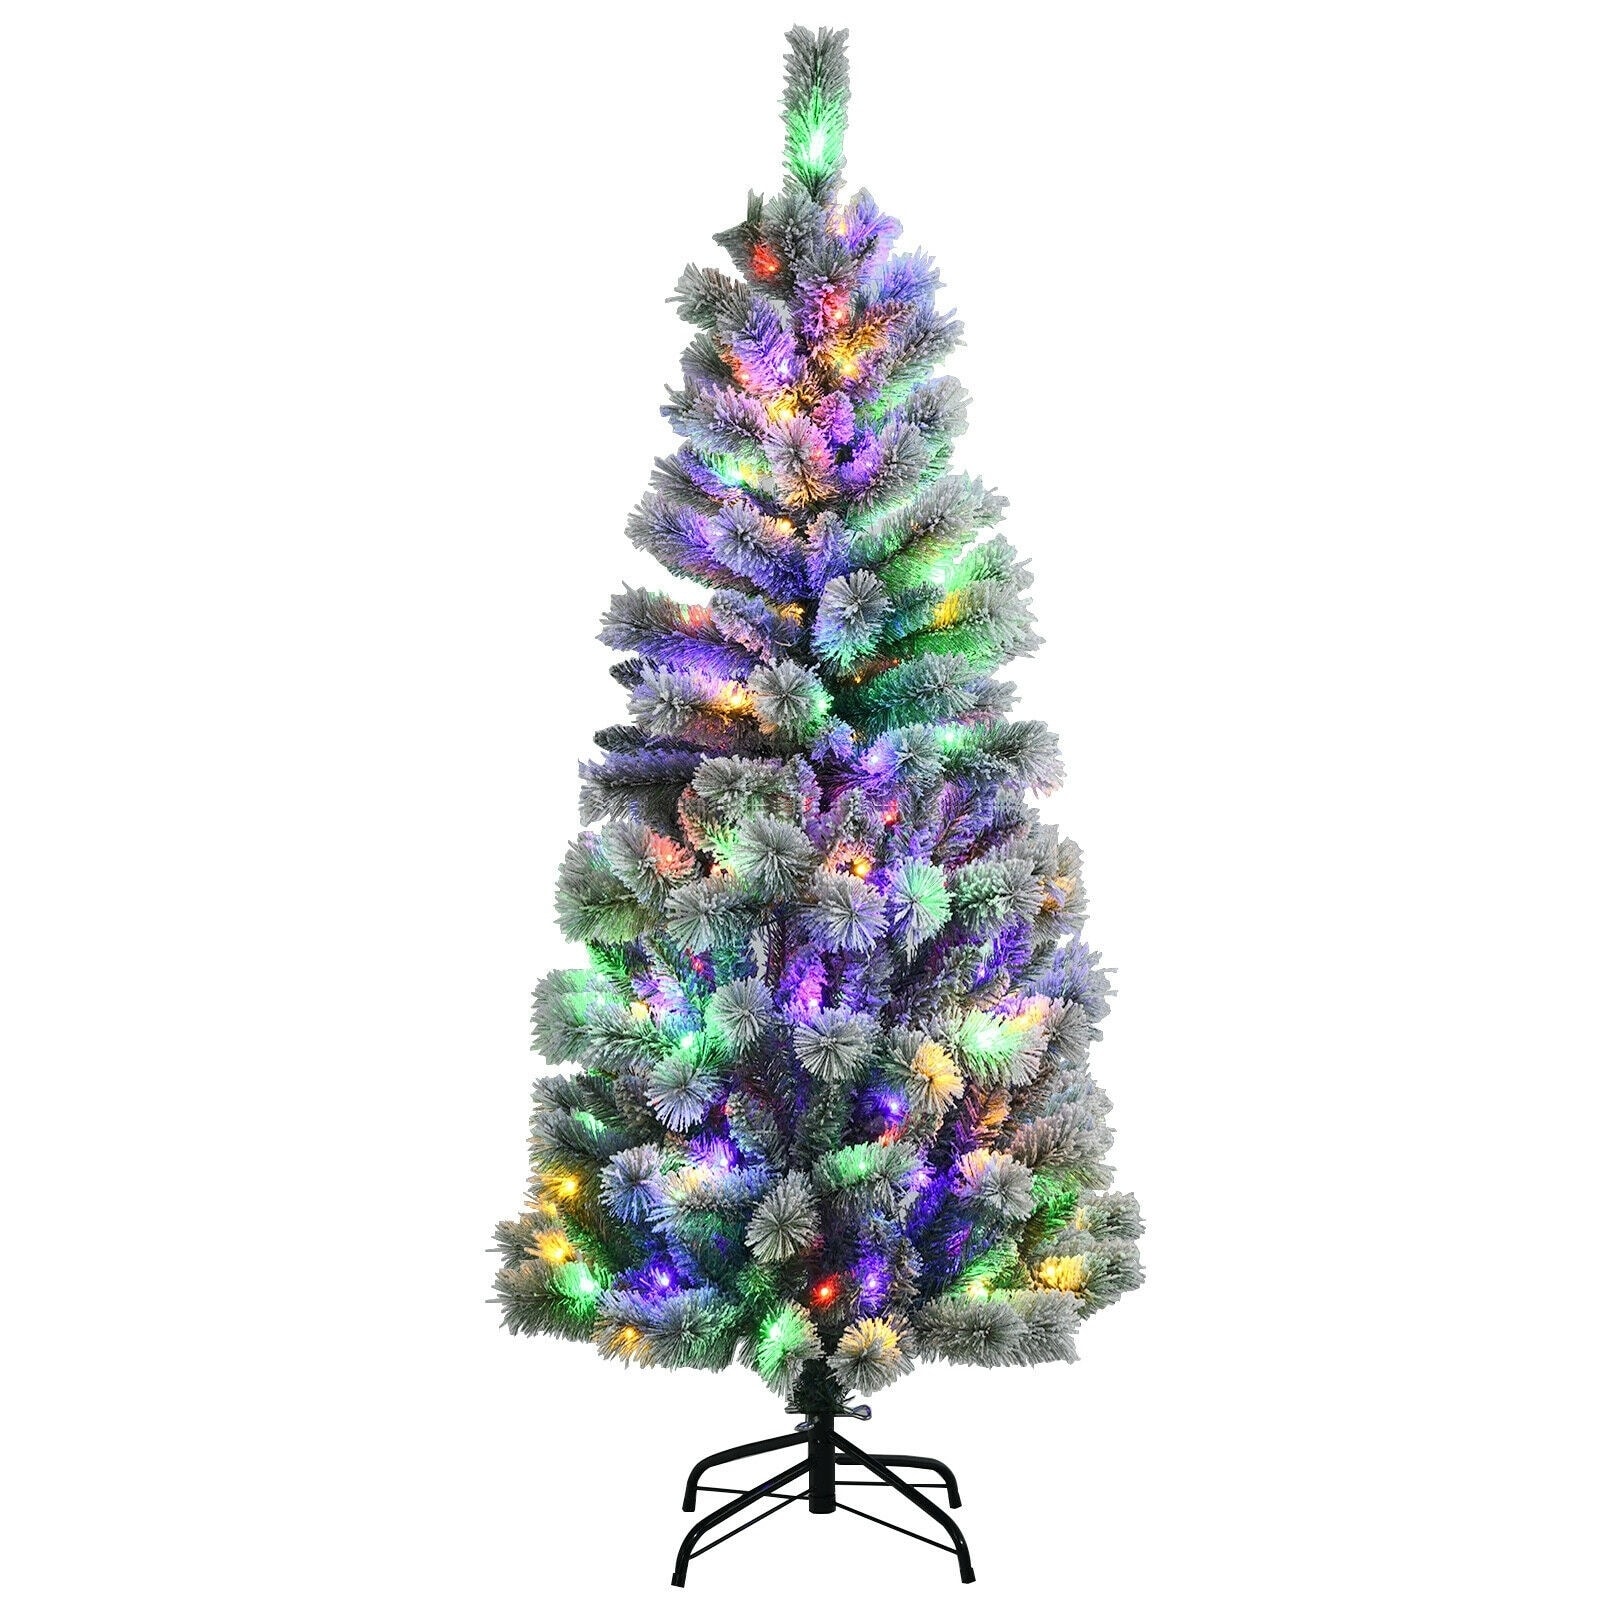 https://ak1.ostkcdn.com/images/products/is/images/direct/5f92ff38191b3b1652fb96121ea7fb3ef7aac6ab/8-Feet-Pre-Lit-Hinged-Snow-Flocked-Christmas-Tree-with-Remote-Control.jpg